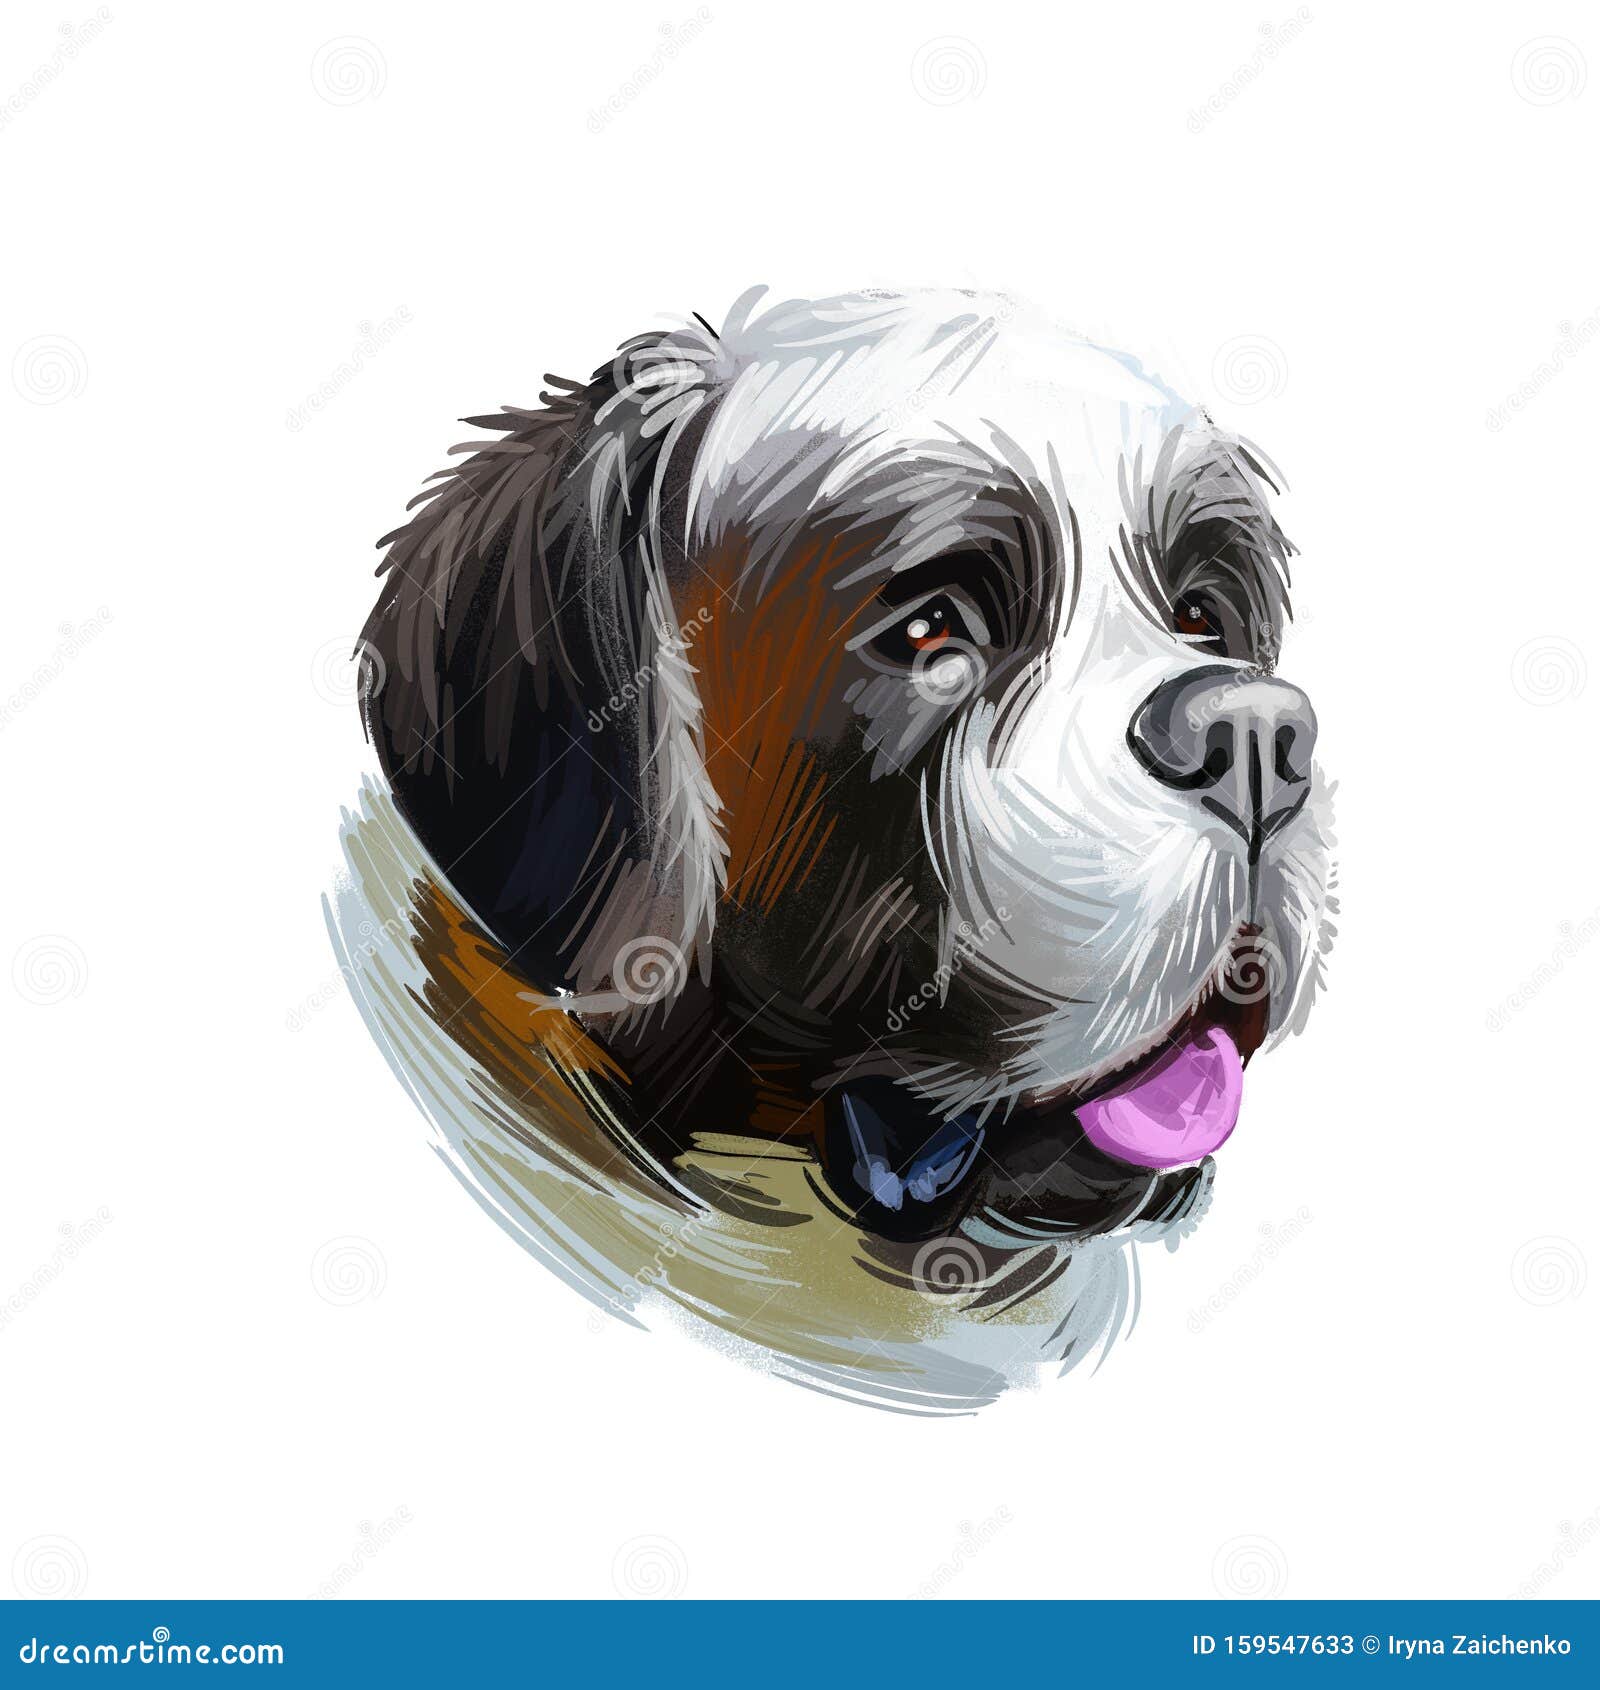 St Bernard Breed Of Large Working Dog From Western Alps Isolated On White Digital Art Animal Watercolor Portrait Closeup Stock Illustration Illustration Of Black Pedigreed 159547633